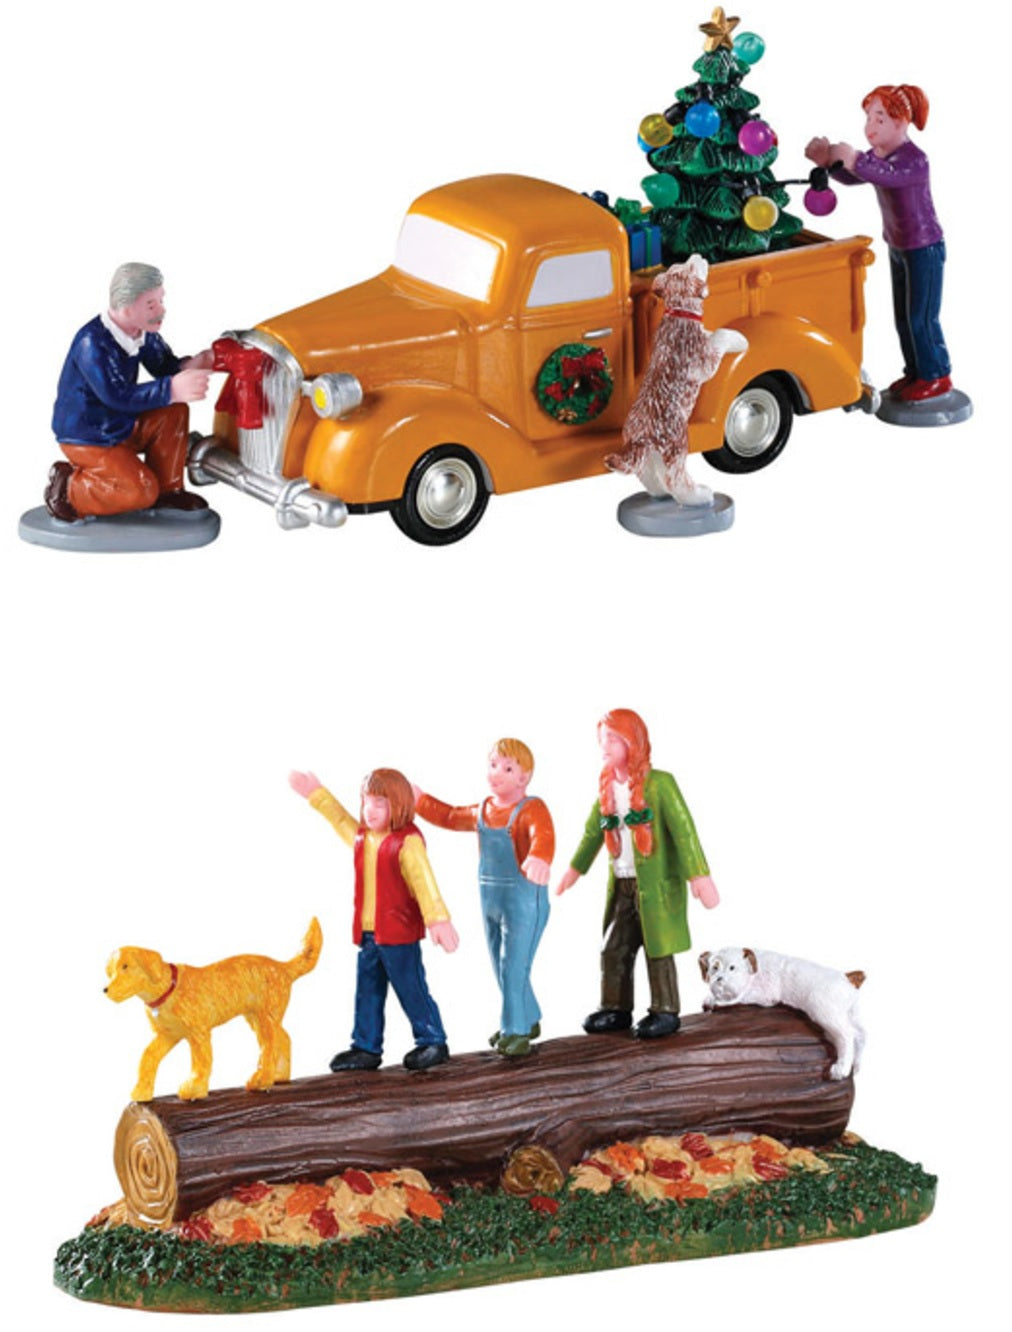 Lemax A3182 Two Assorted Village People Christmas Tabletop Decoration, Multicolored